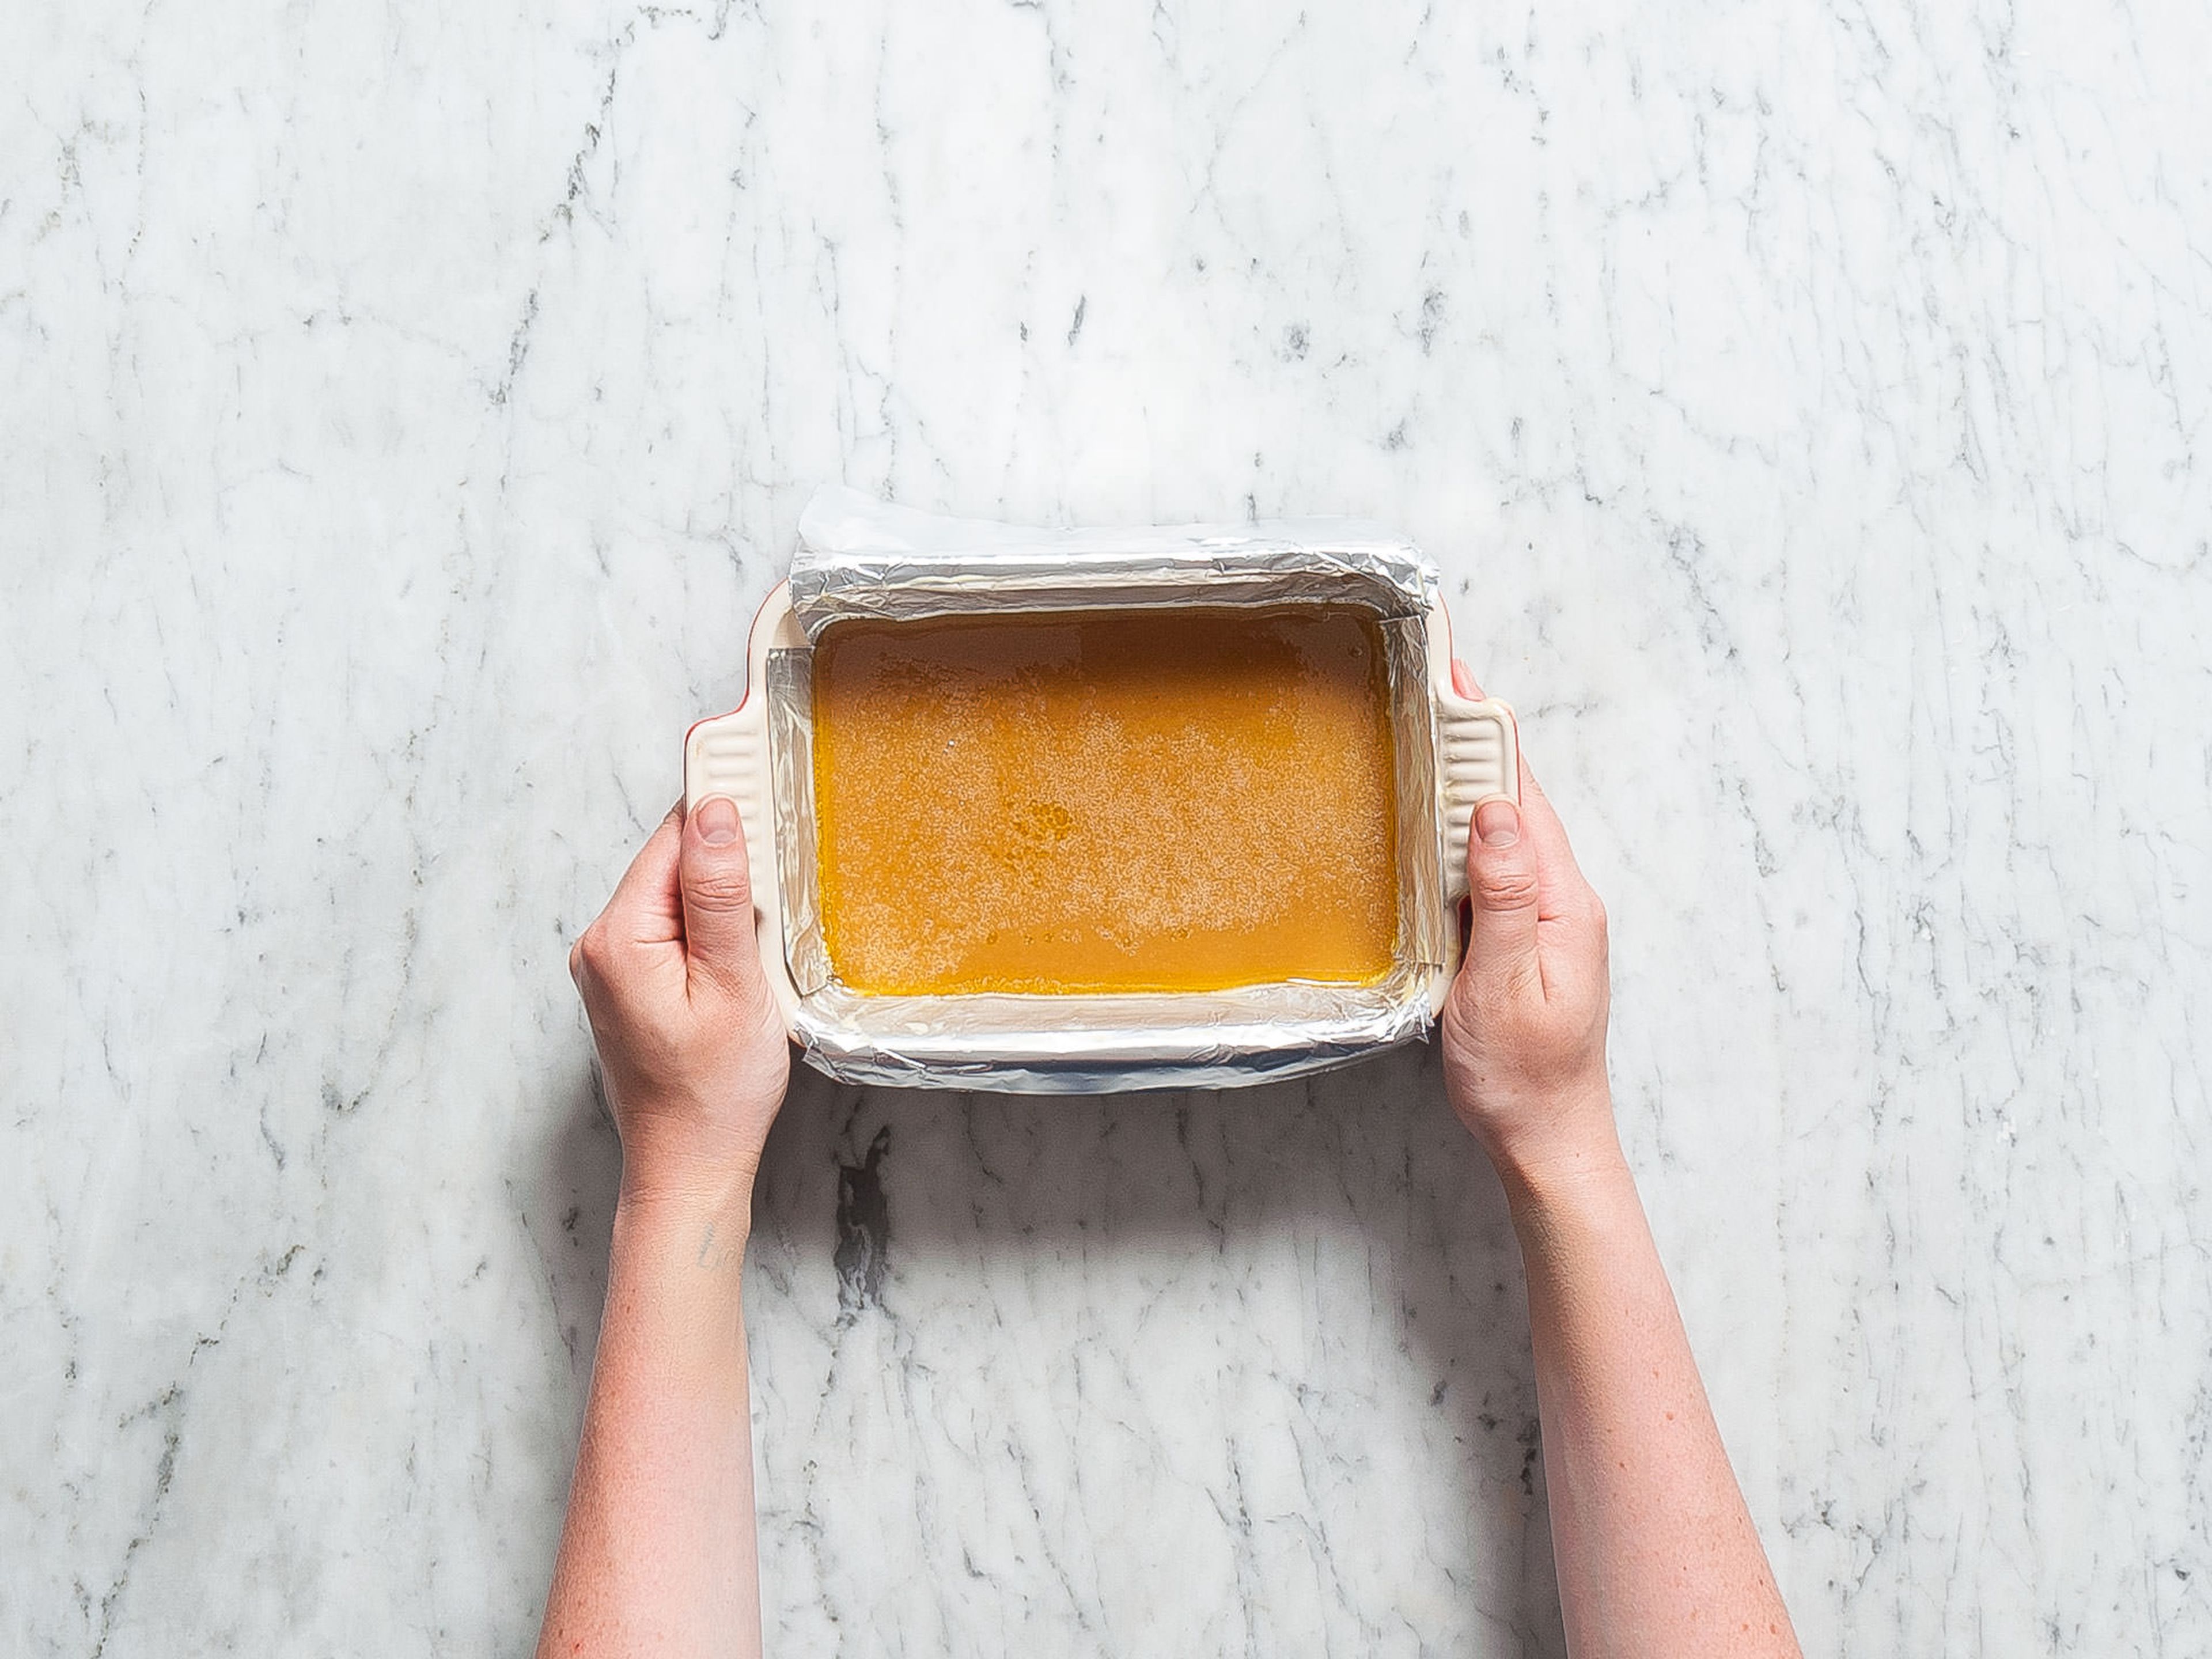 Grease baking dish lined with aluminum foil. Pour caramel mixture into baking dish and refrigerate for approx. 60 min., or until firm. Remove from baking dish and cut into equal-sized candies. Enjoy!